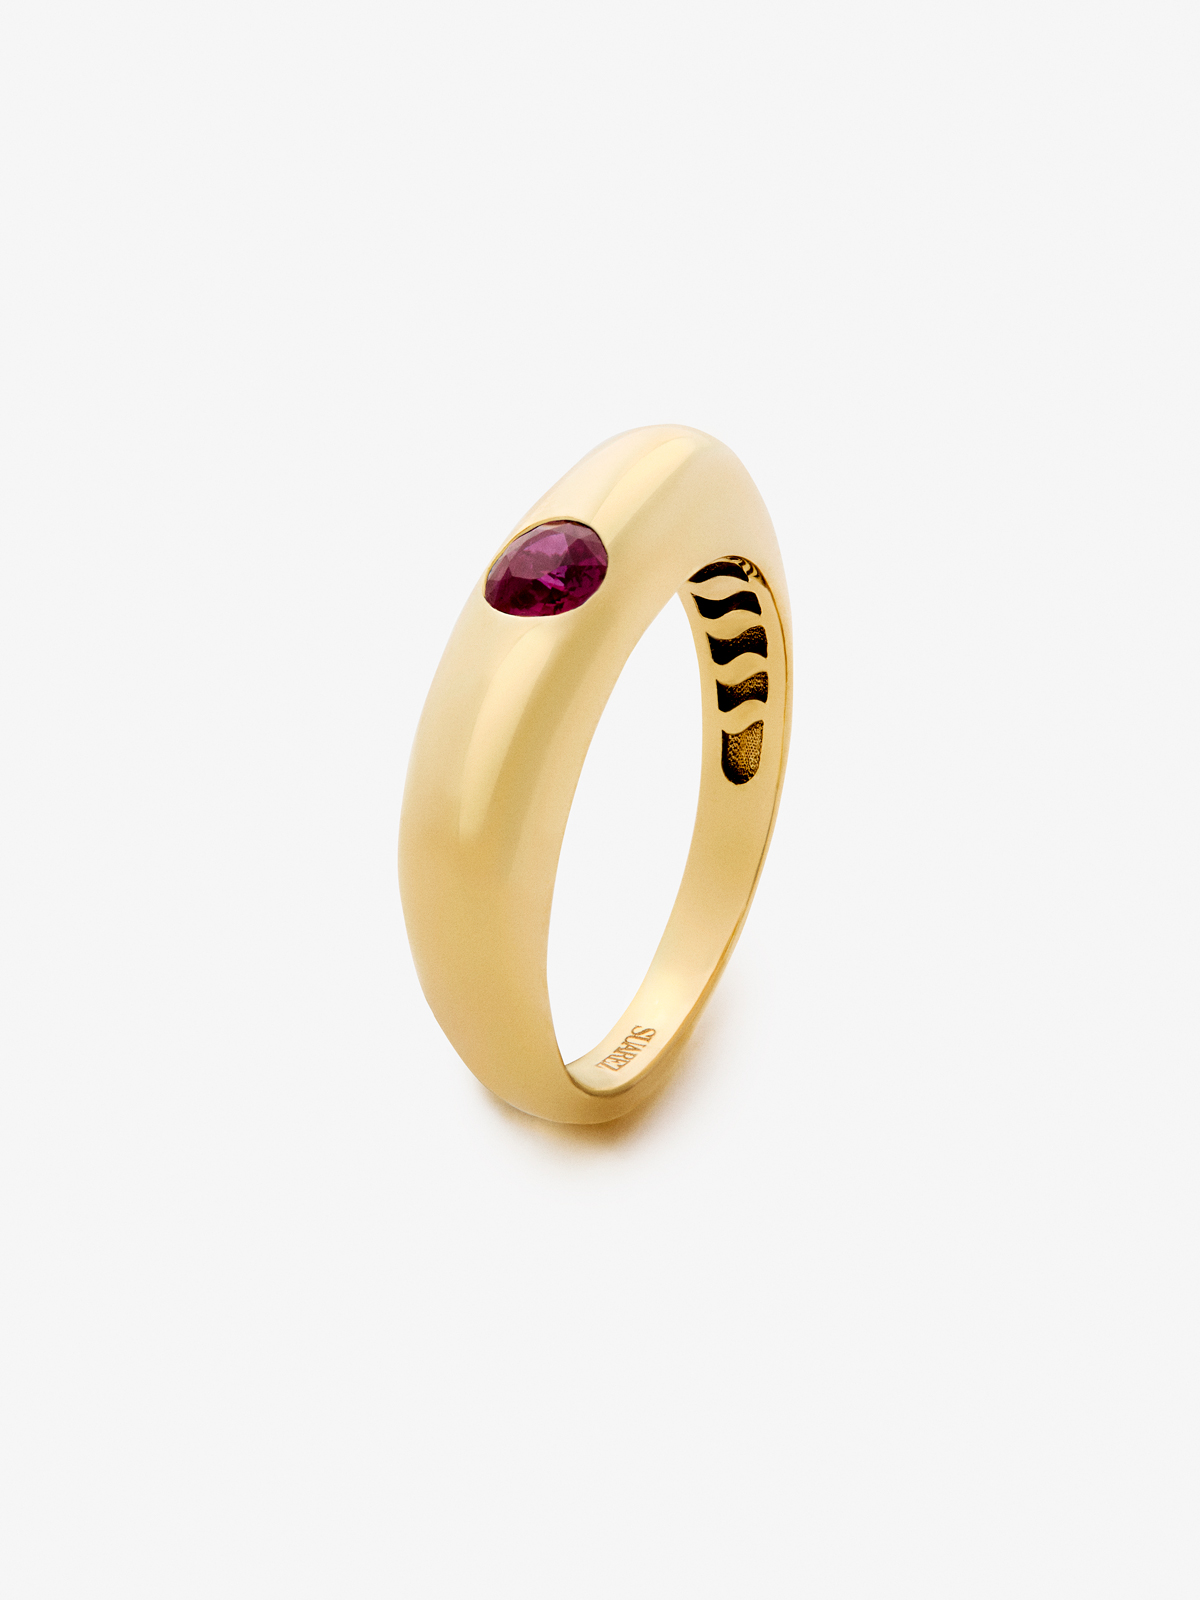 18K yellow gold ring with 0.32 ct brilliant cut ruby